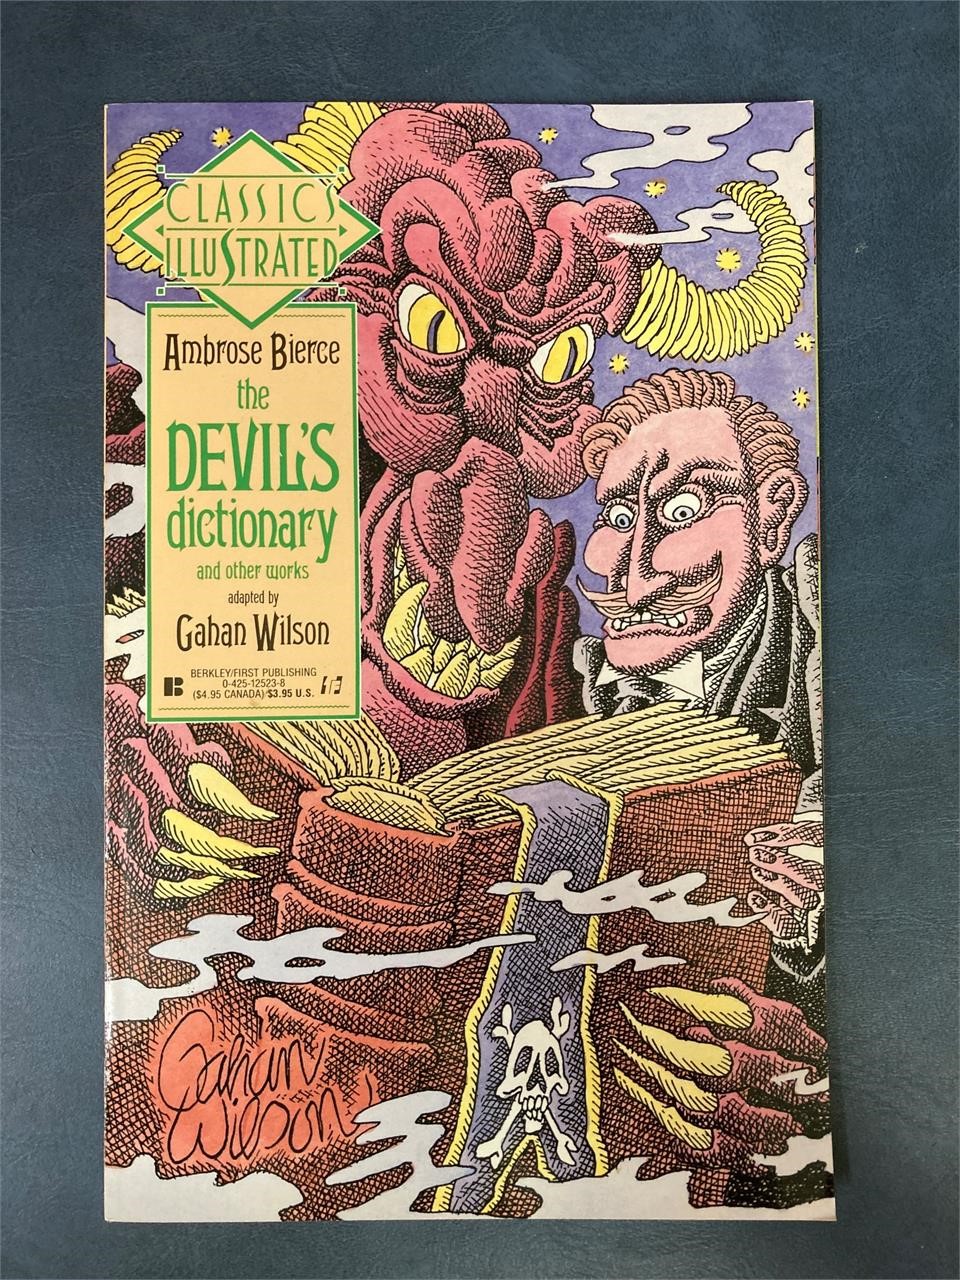 Classics Illustrated - The Devil’s Dictionary